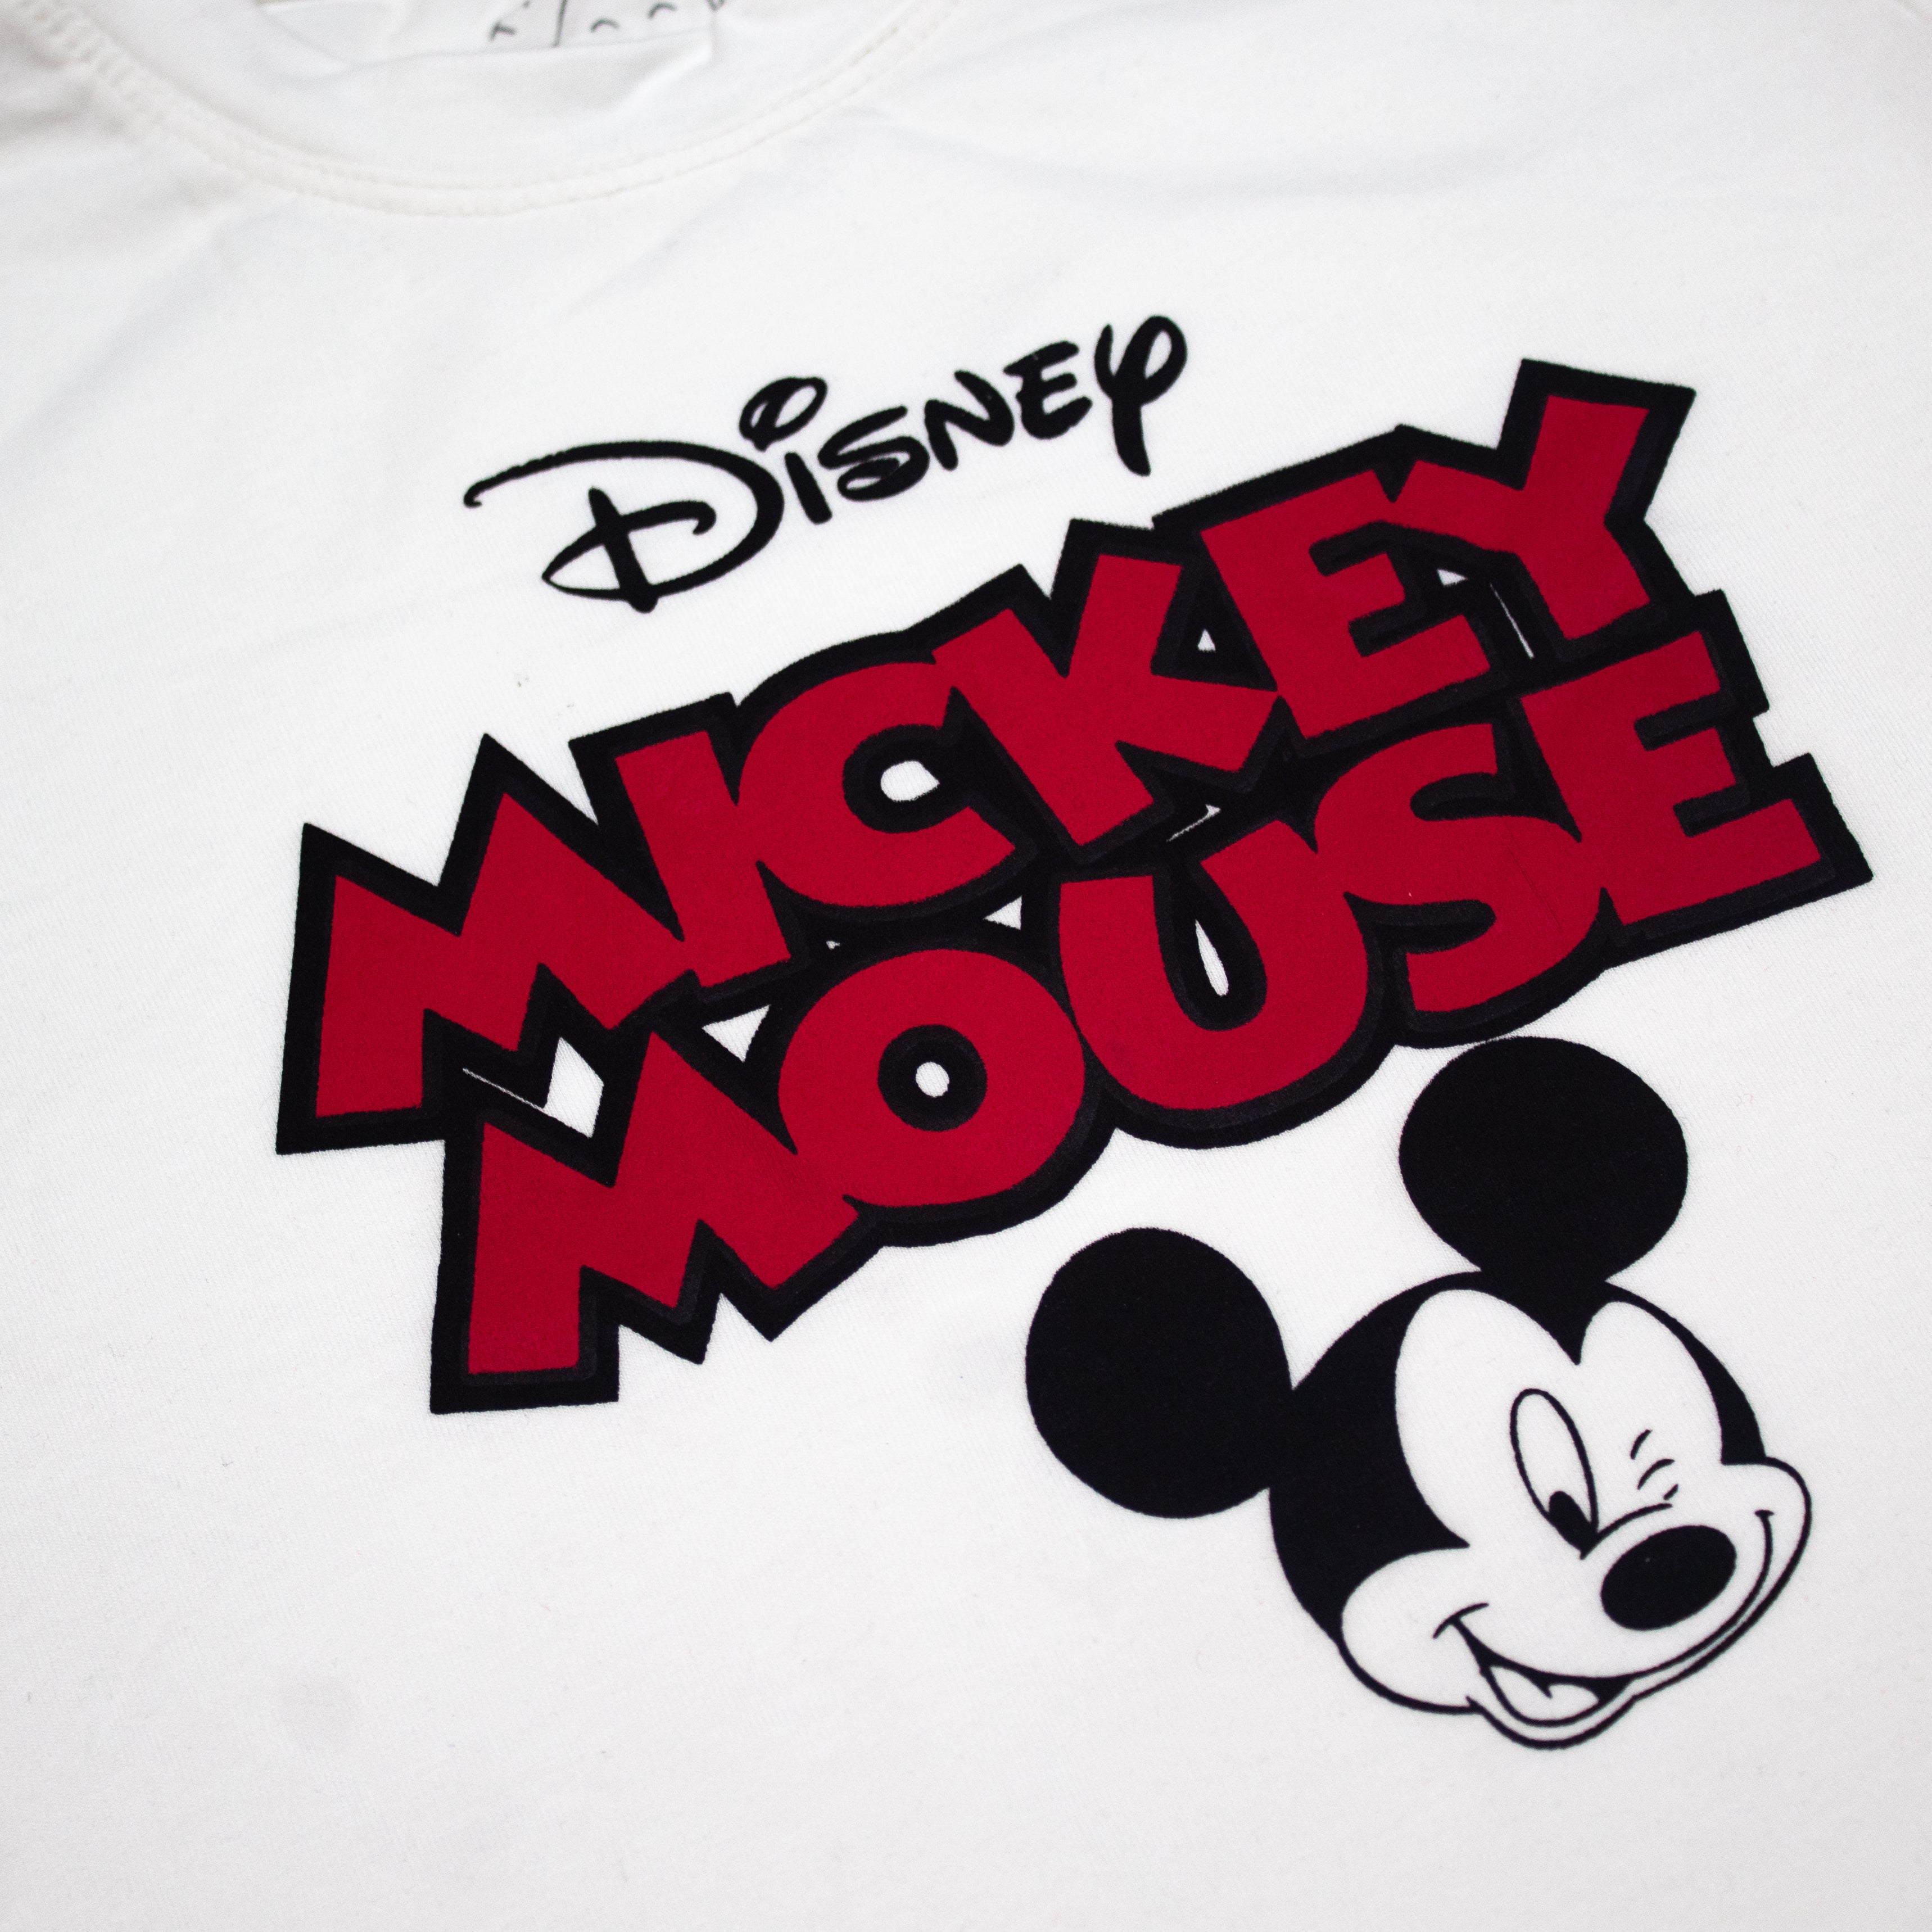 Mickey Mouse White n Red T-Shirt And Shorts For Kids